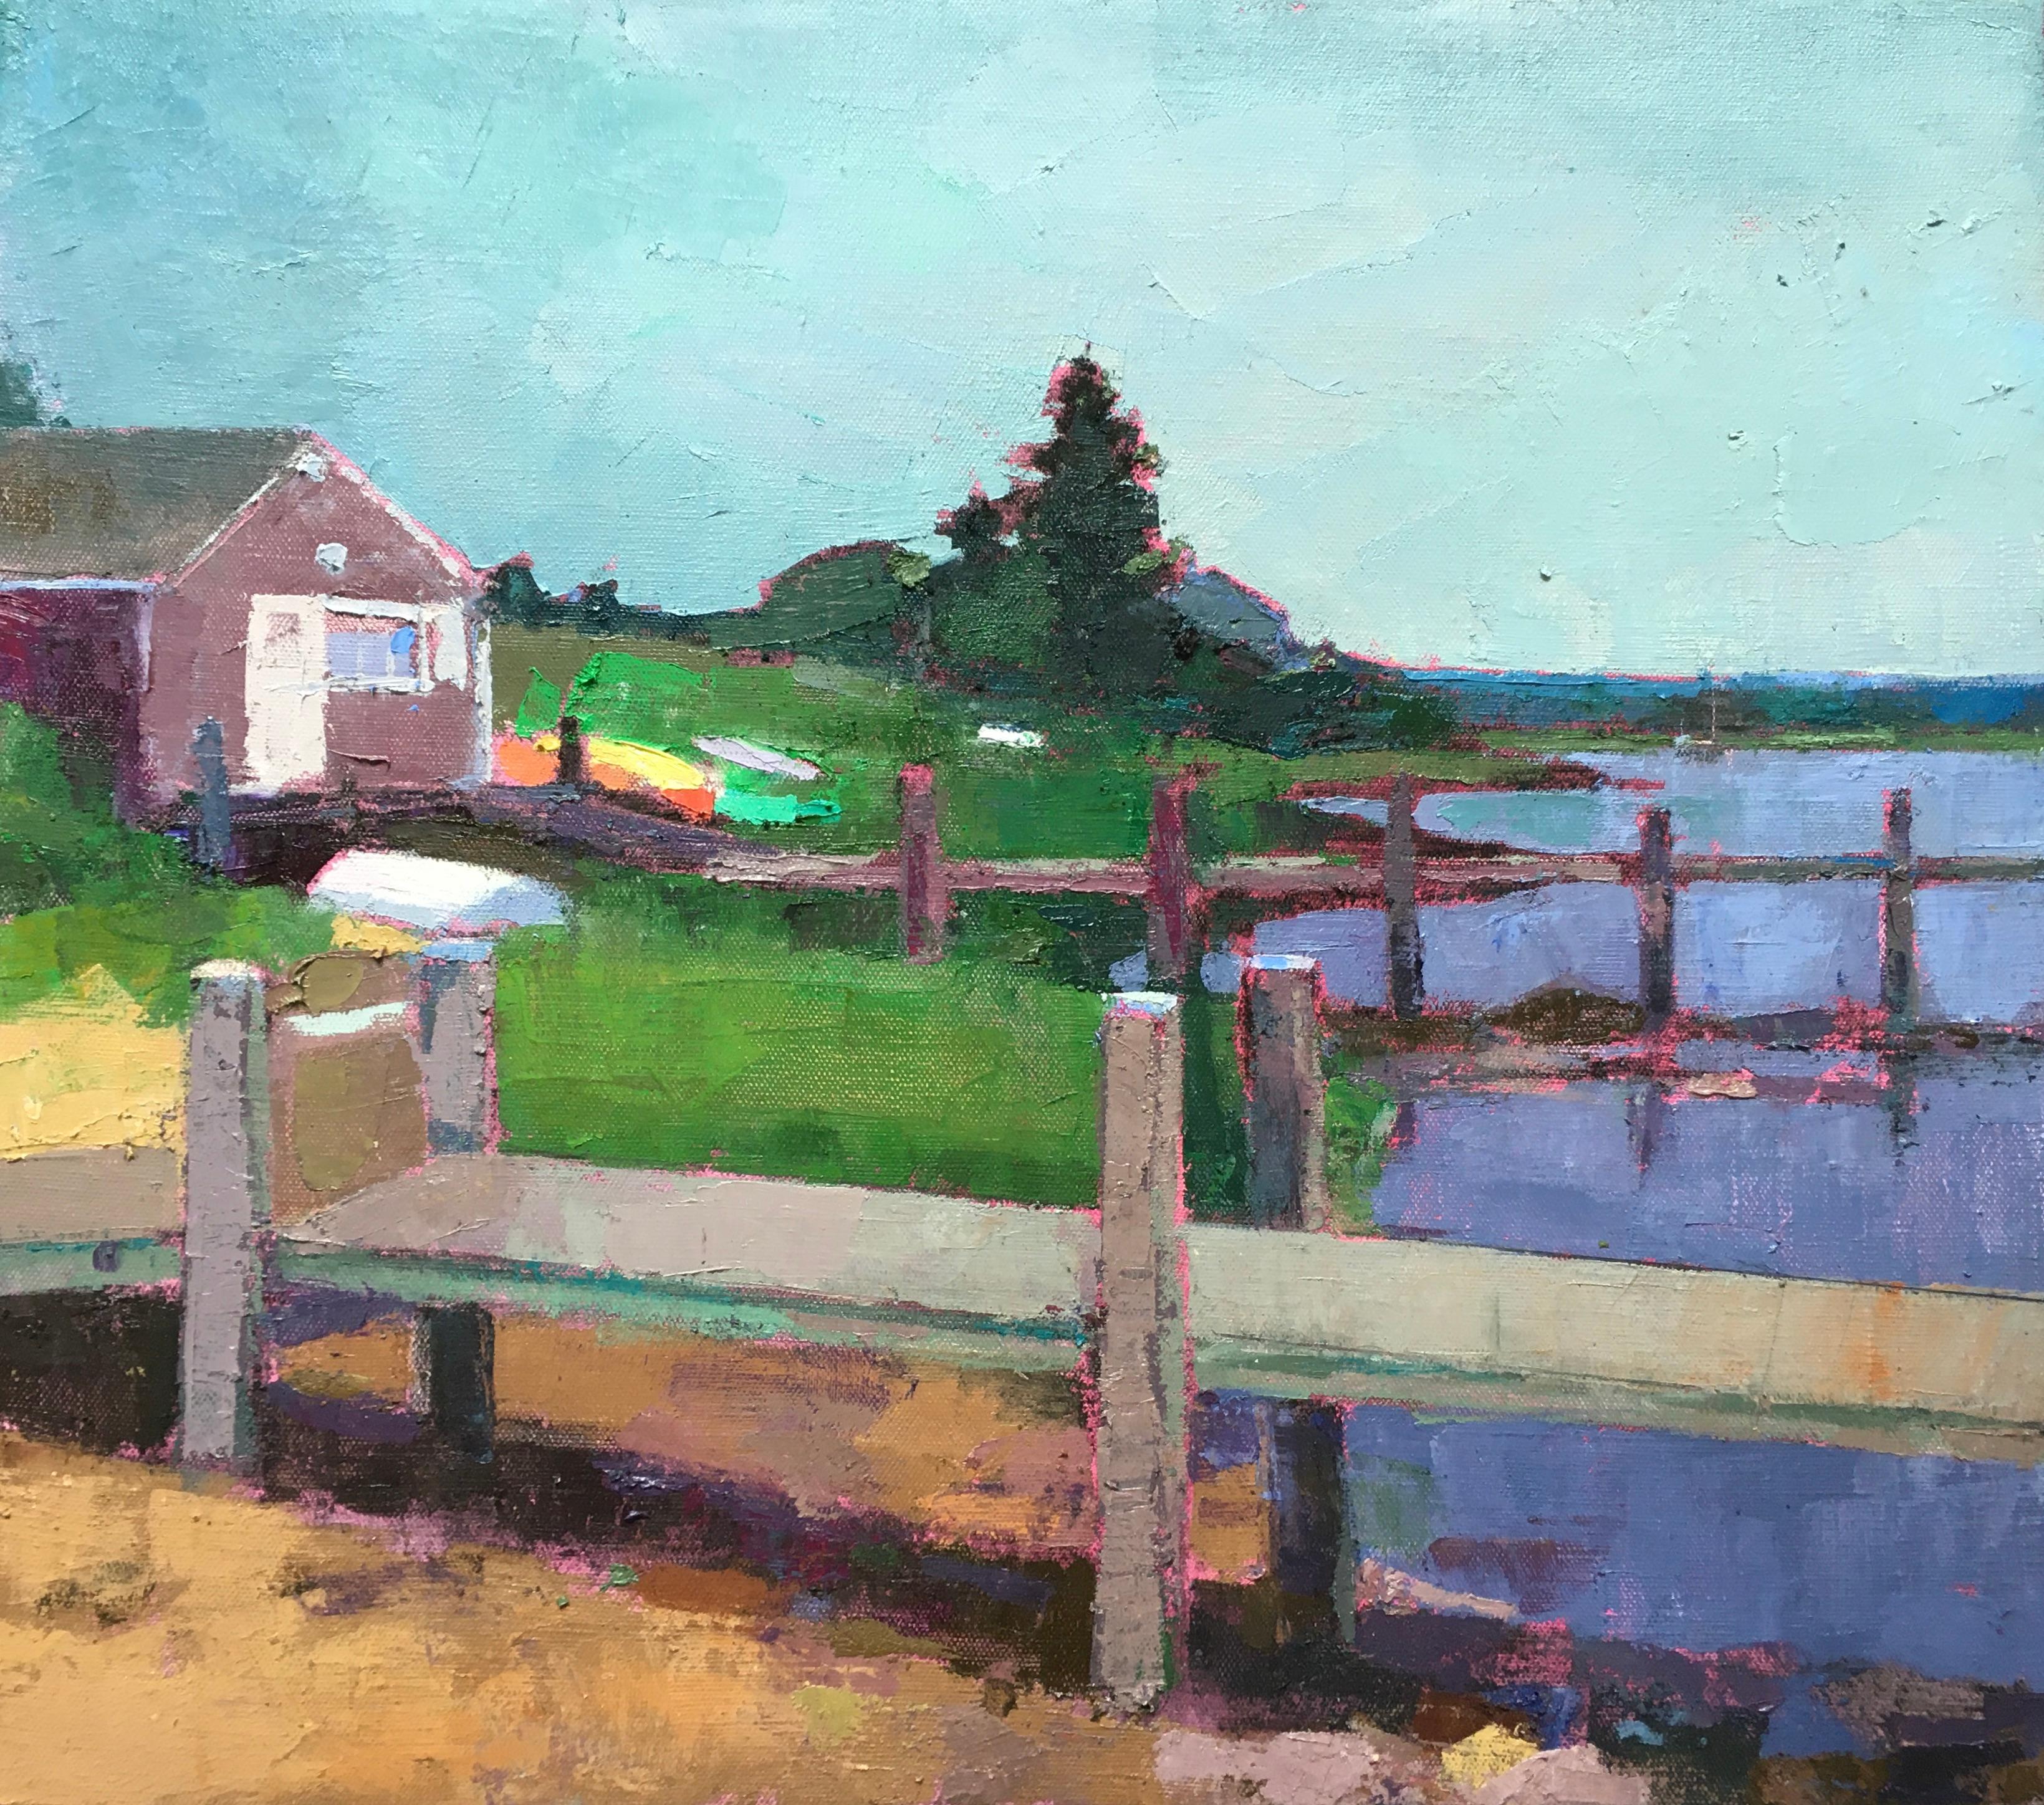 Larry Horowitz Landscape Painting - "Menemsha Docks" oil painting depicting a vibrant dock and luscious greenery